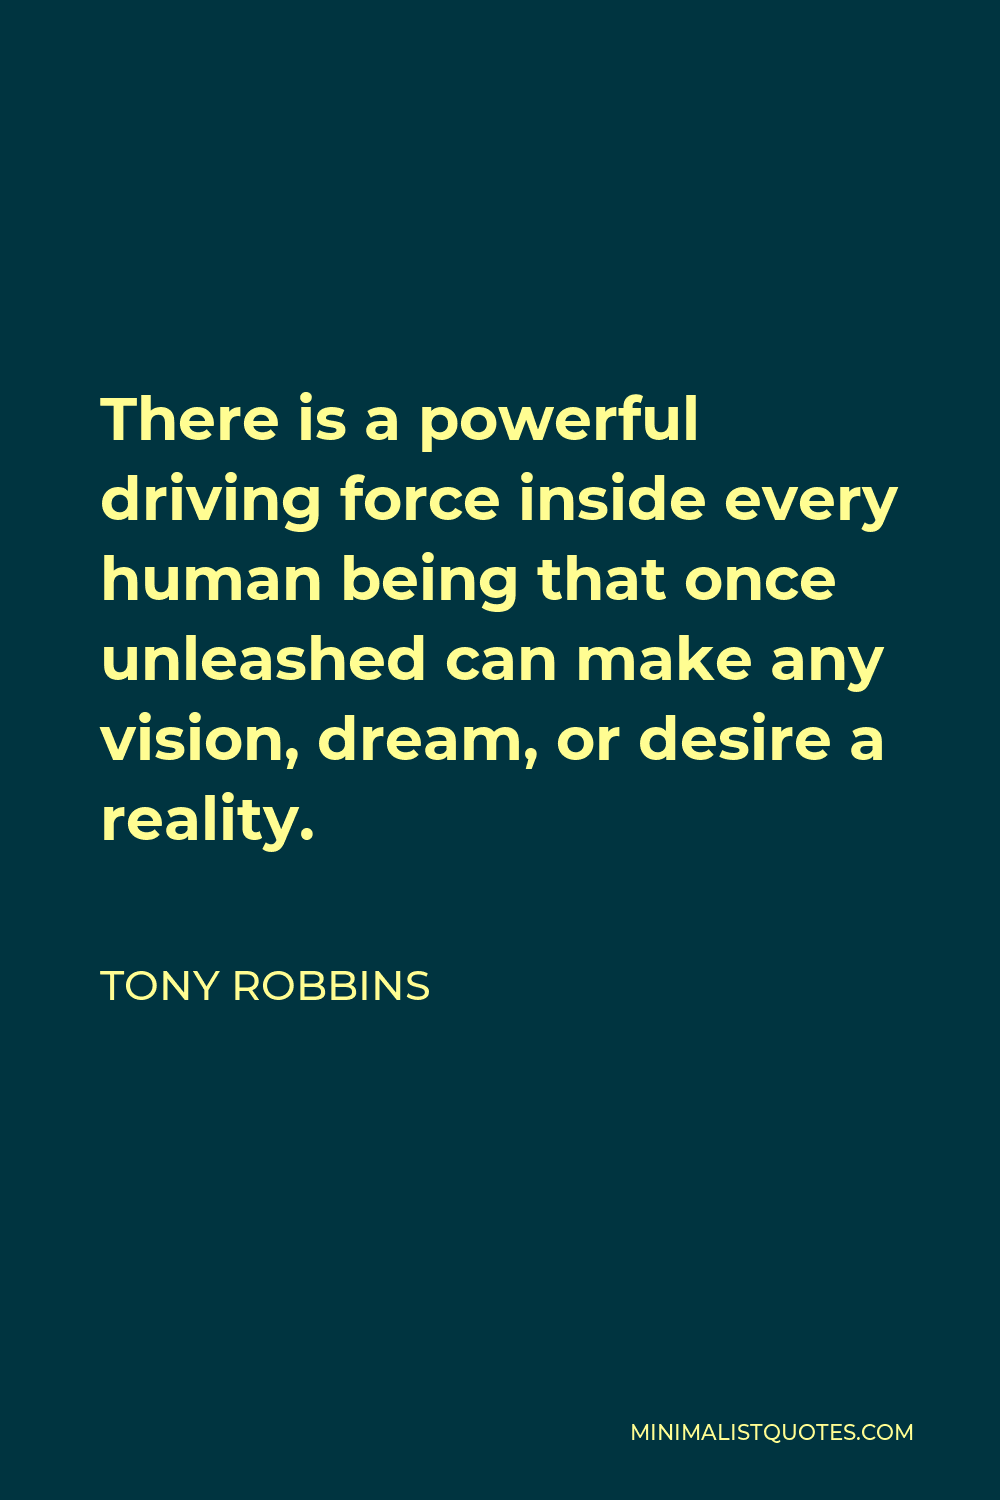 Tony Robbins Quote - There is a powerful driving force inside every human being that once unleashed can make any vision, dream, or desire a reality.